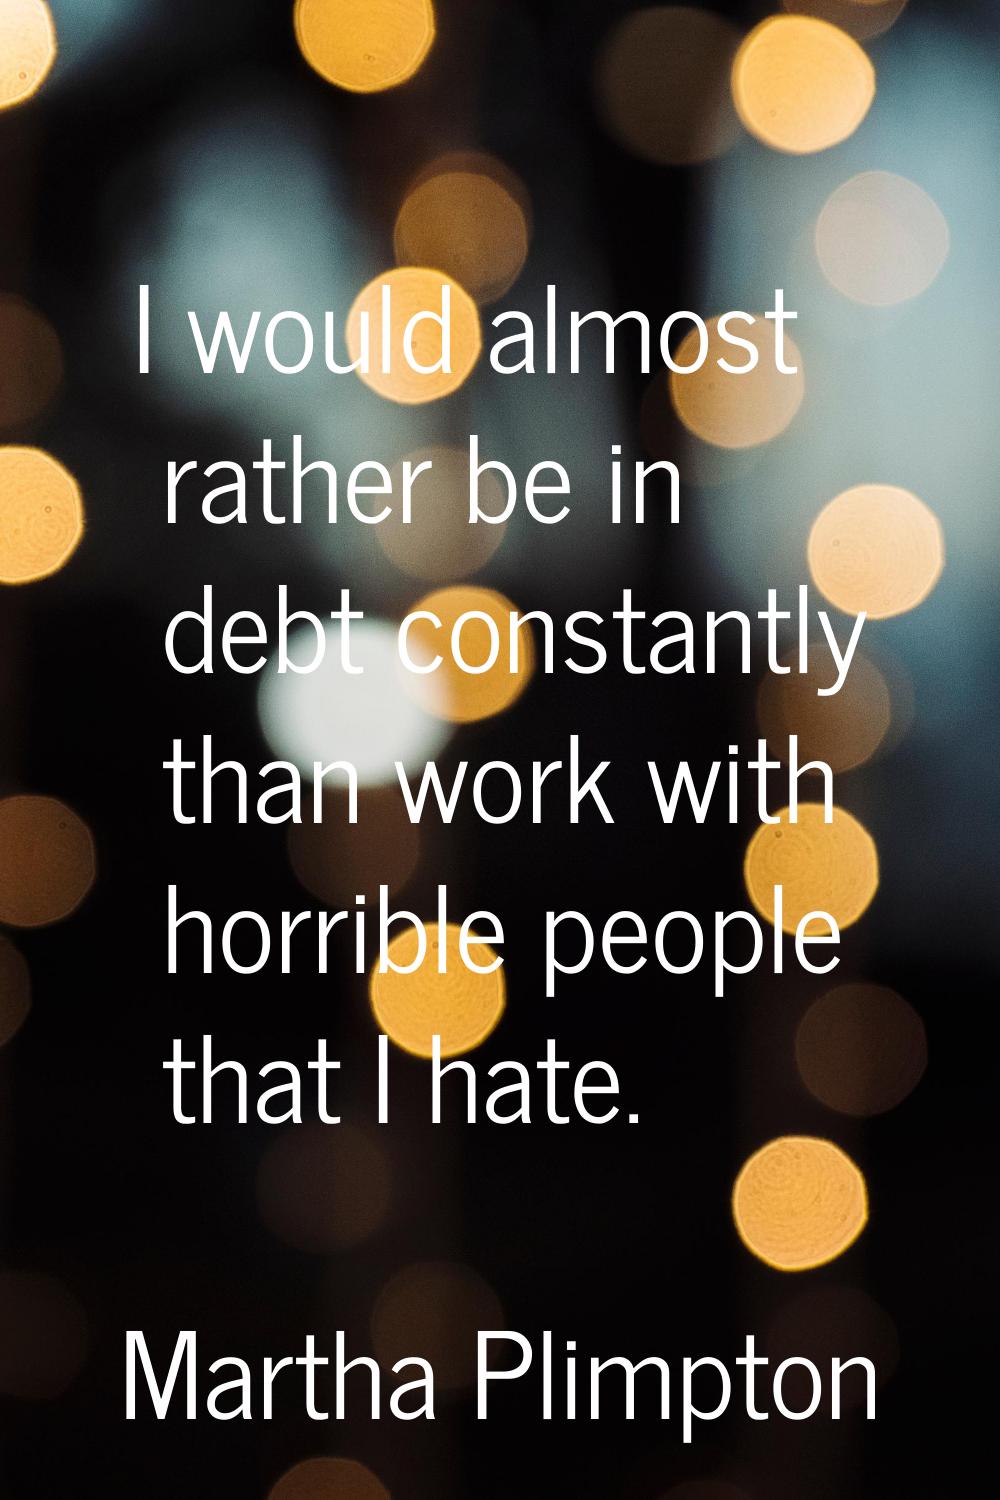 I would almost rather be in debt constantly than work with horrible people that I hate.